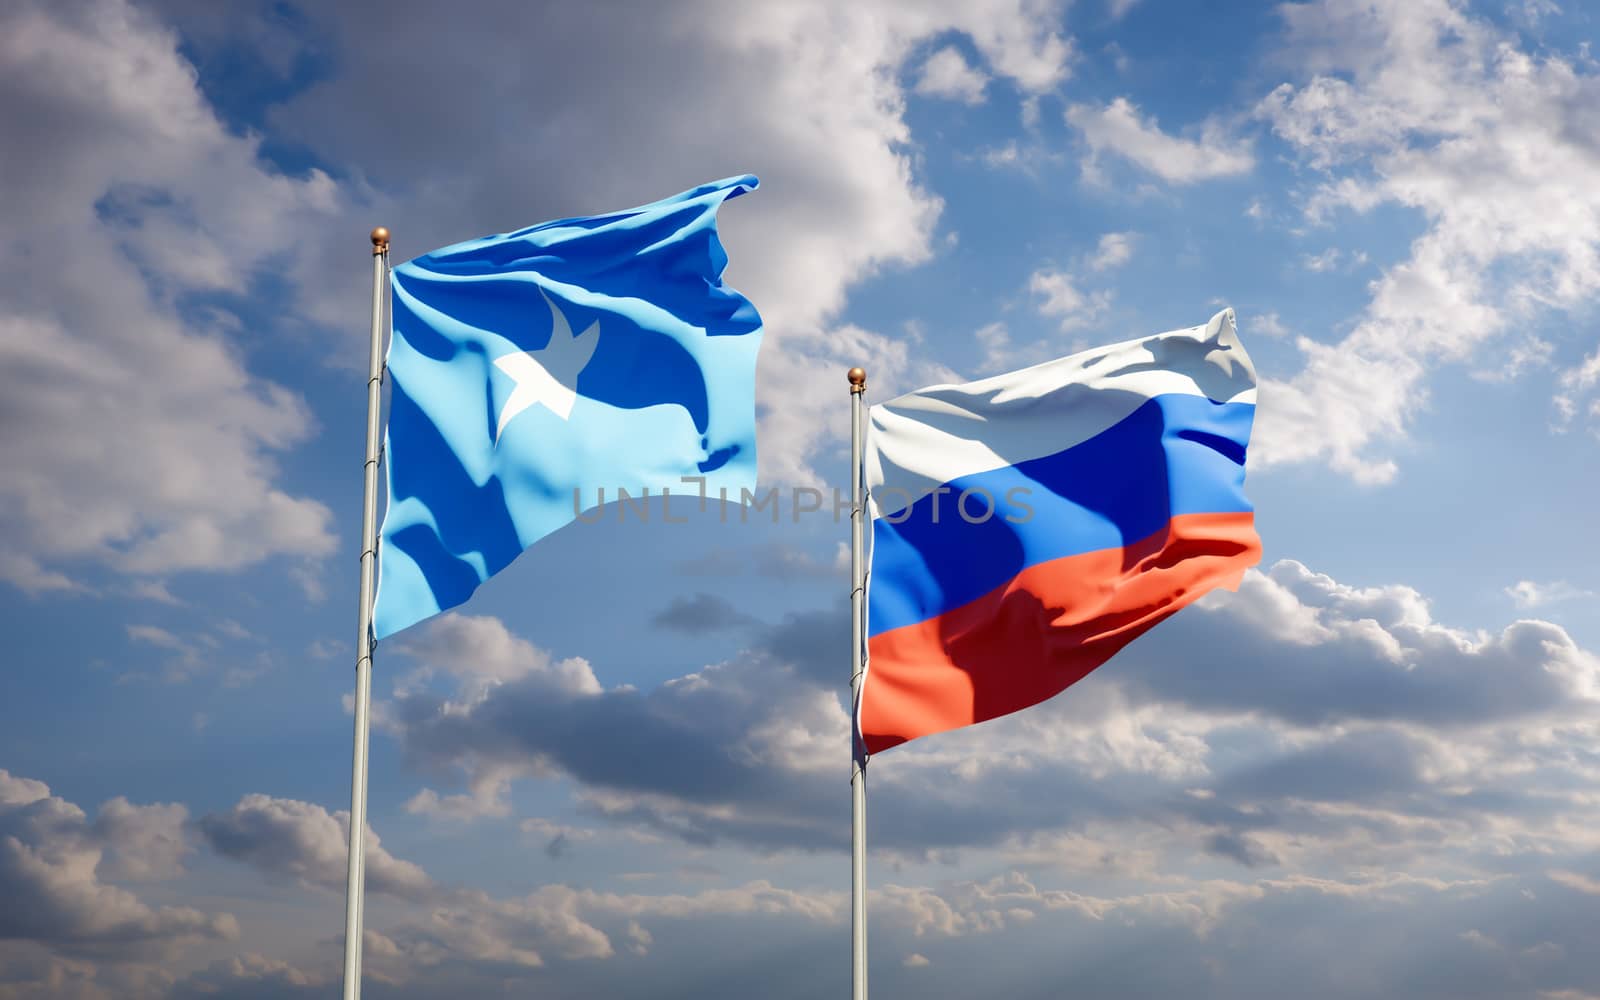 Beautiful national state flags of Somalia and Russia together at the sky background. 3D artwork concept. 